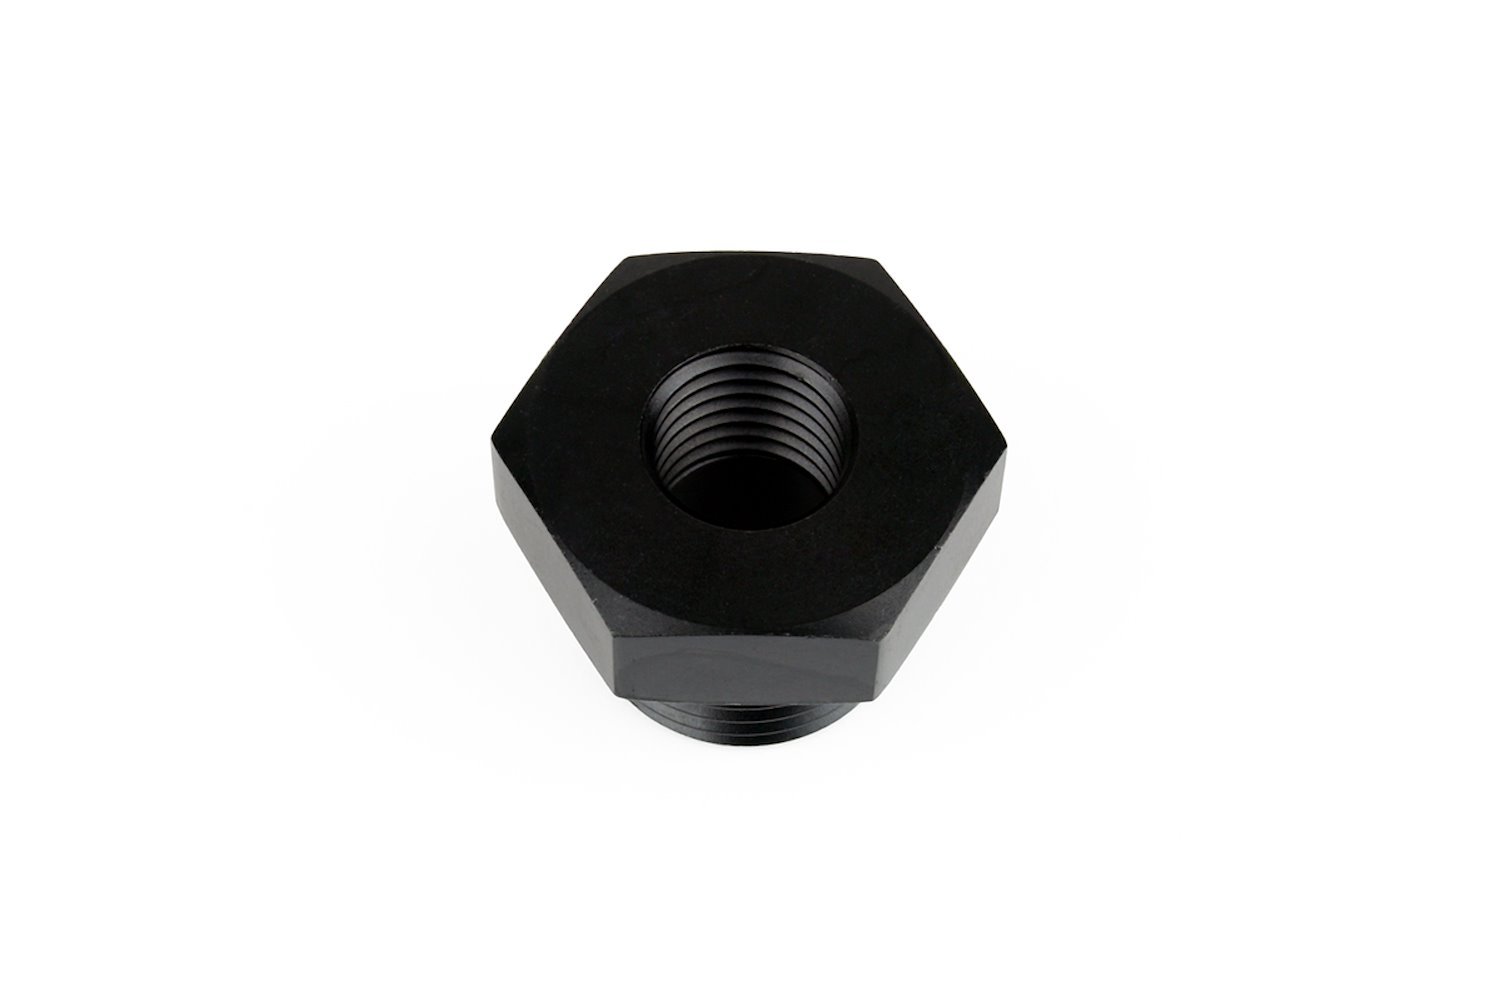 OF-10-M12 RaceFlux Sensor Port Adapter Fitting, -10AN O-Ring to M12x1.50 Female